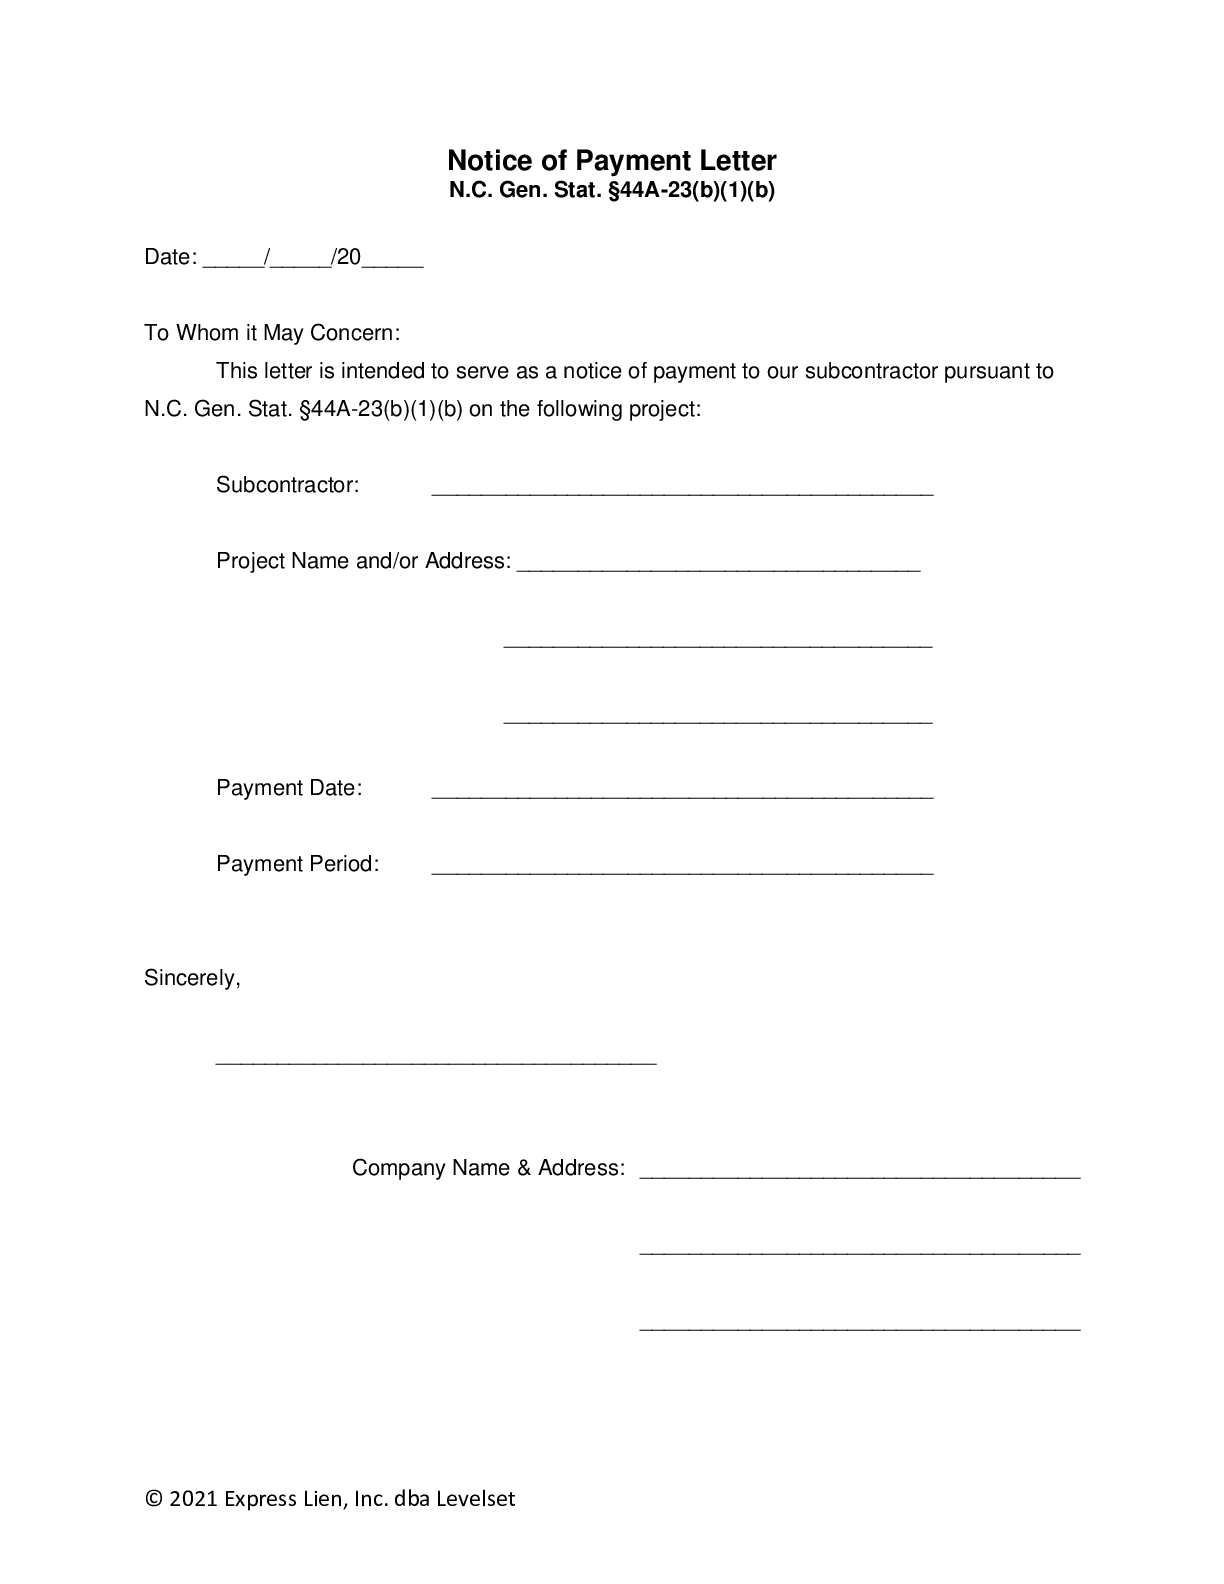 North Carolina Notice of Payment Letter form - free from